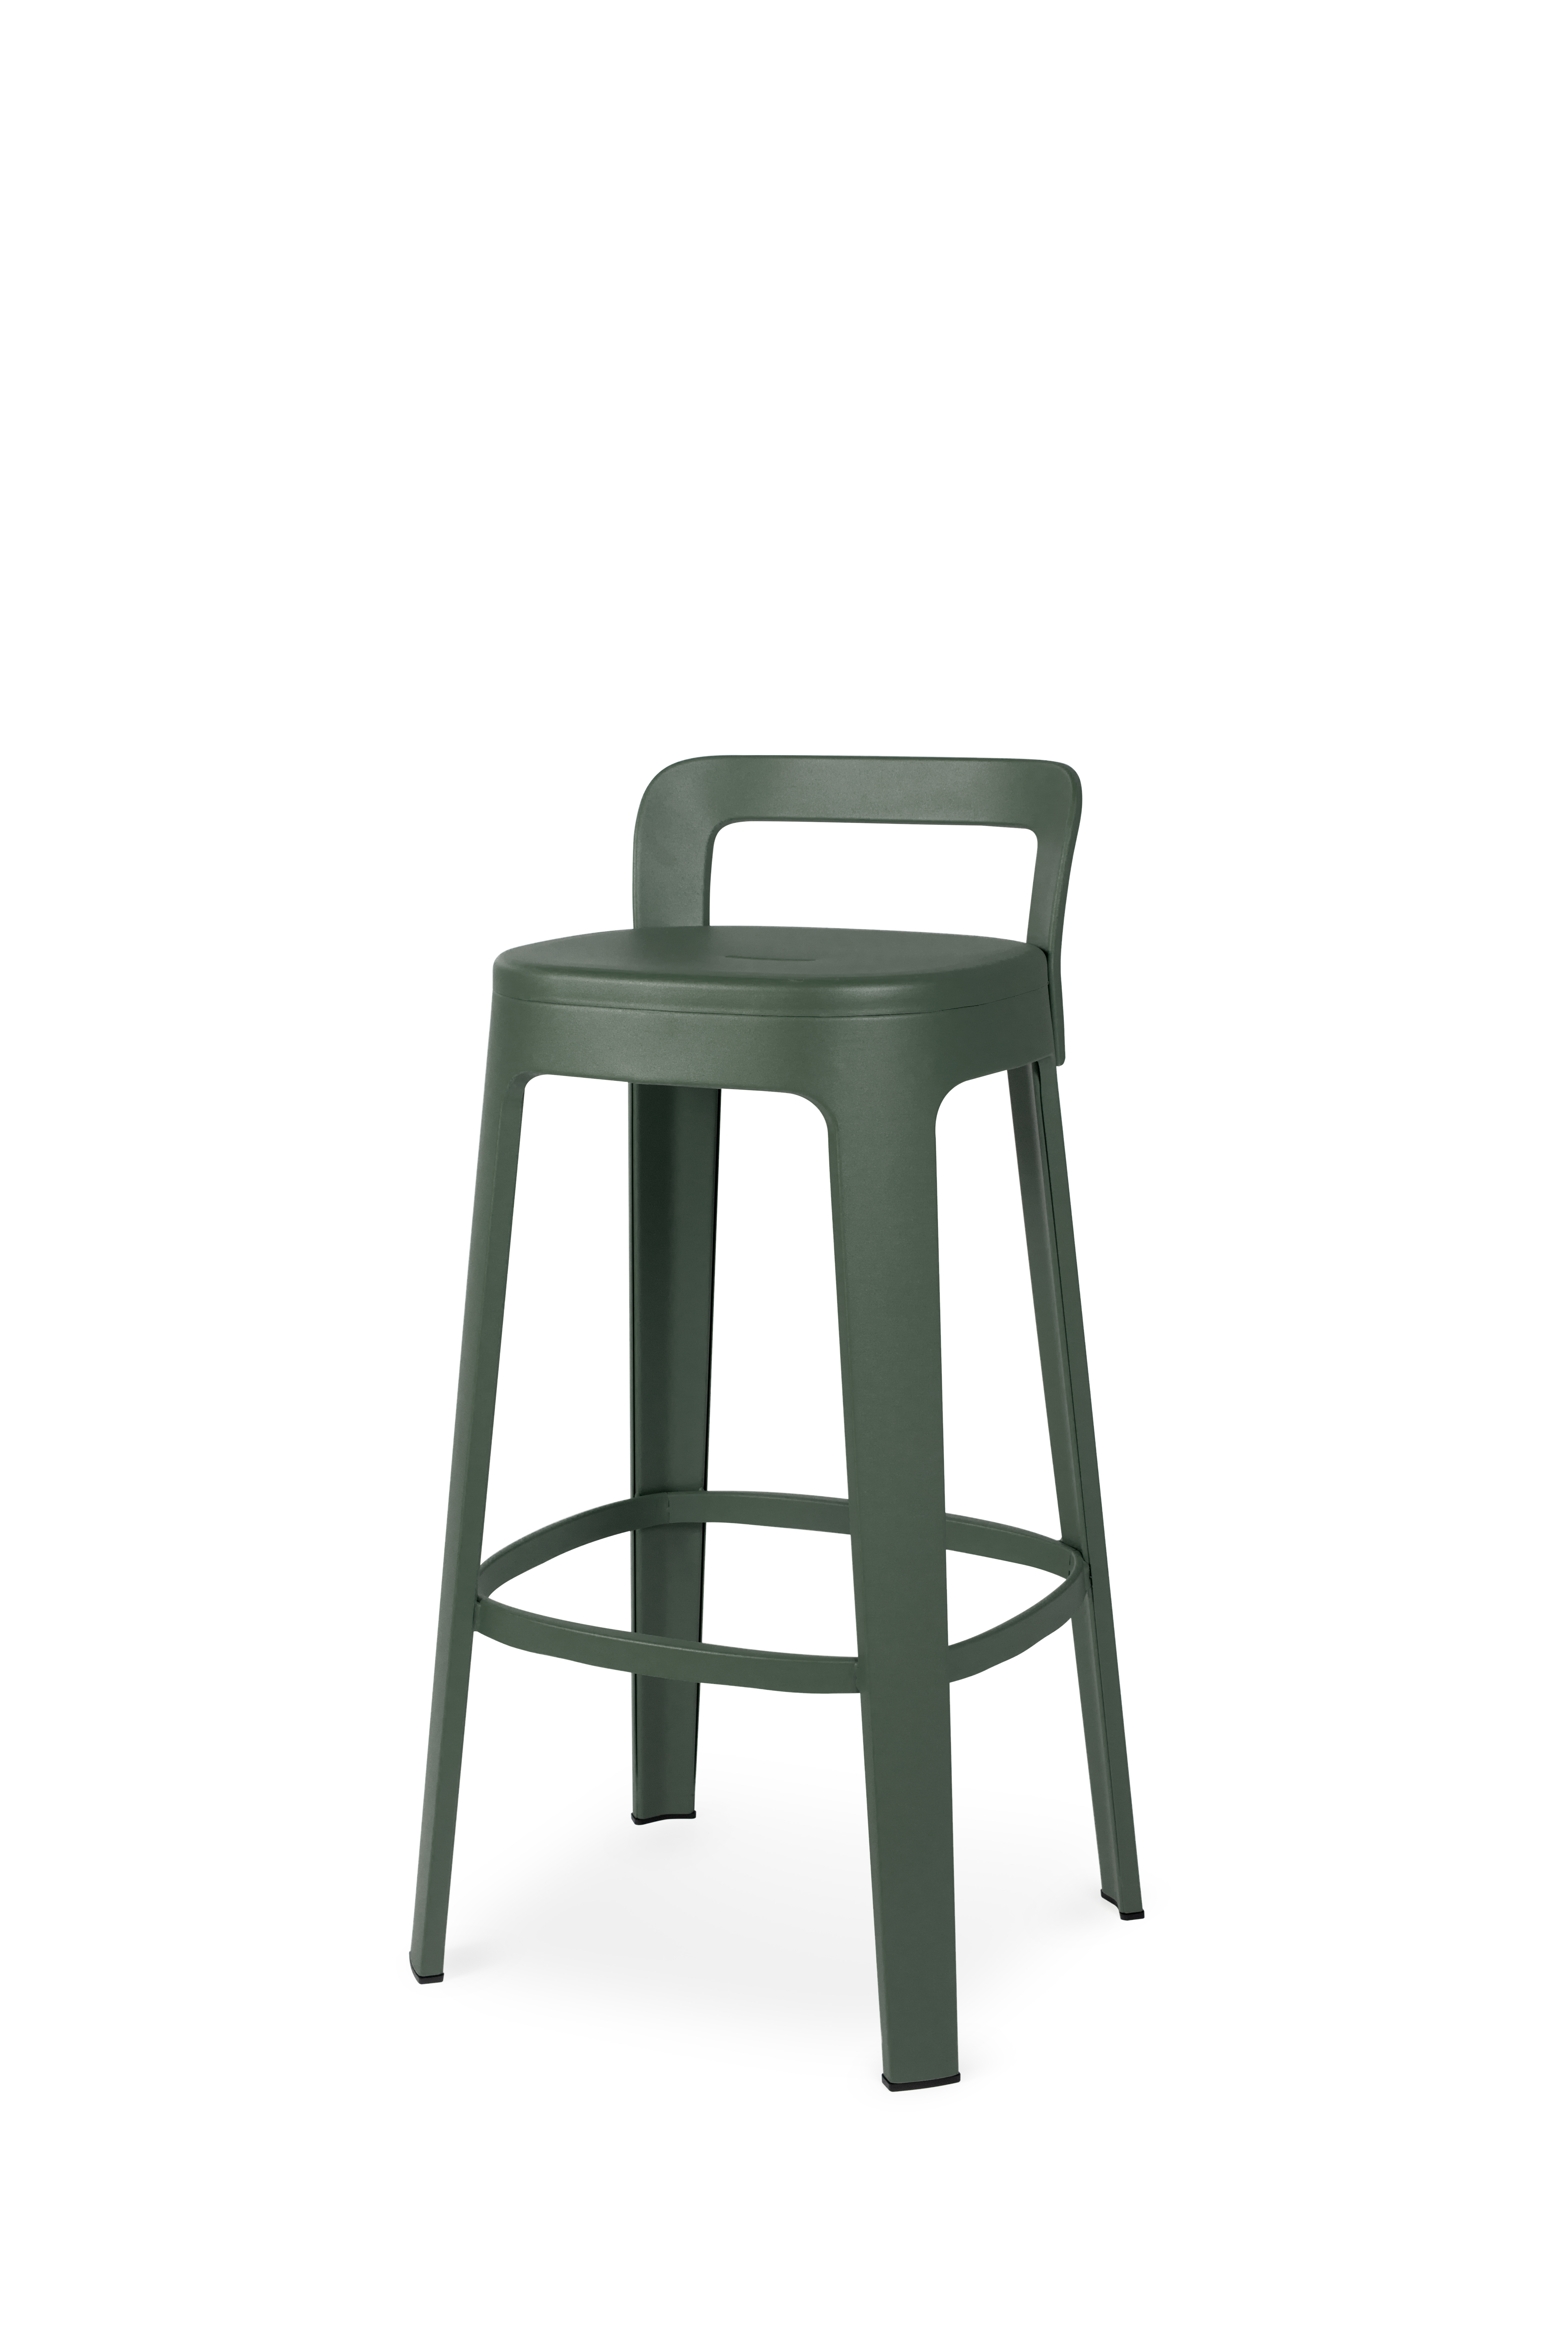 Bar stool with backrest "Tall" - design OMBRA bar from RS Barcelona 